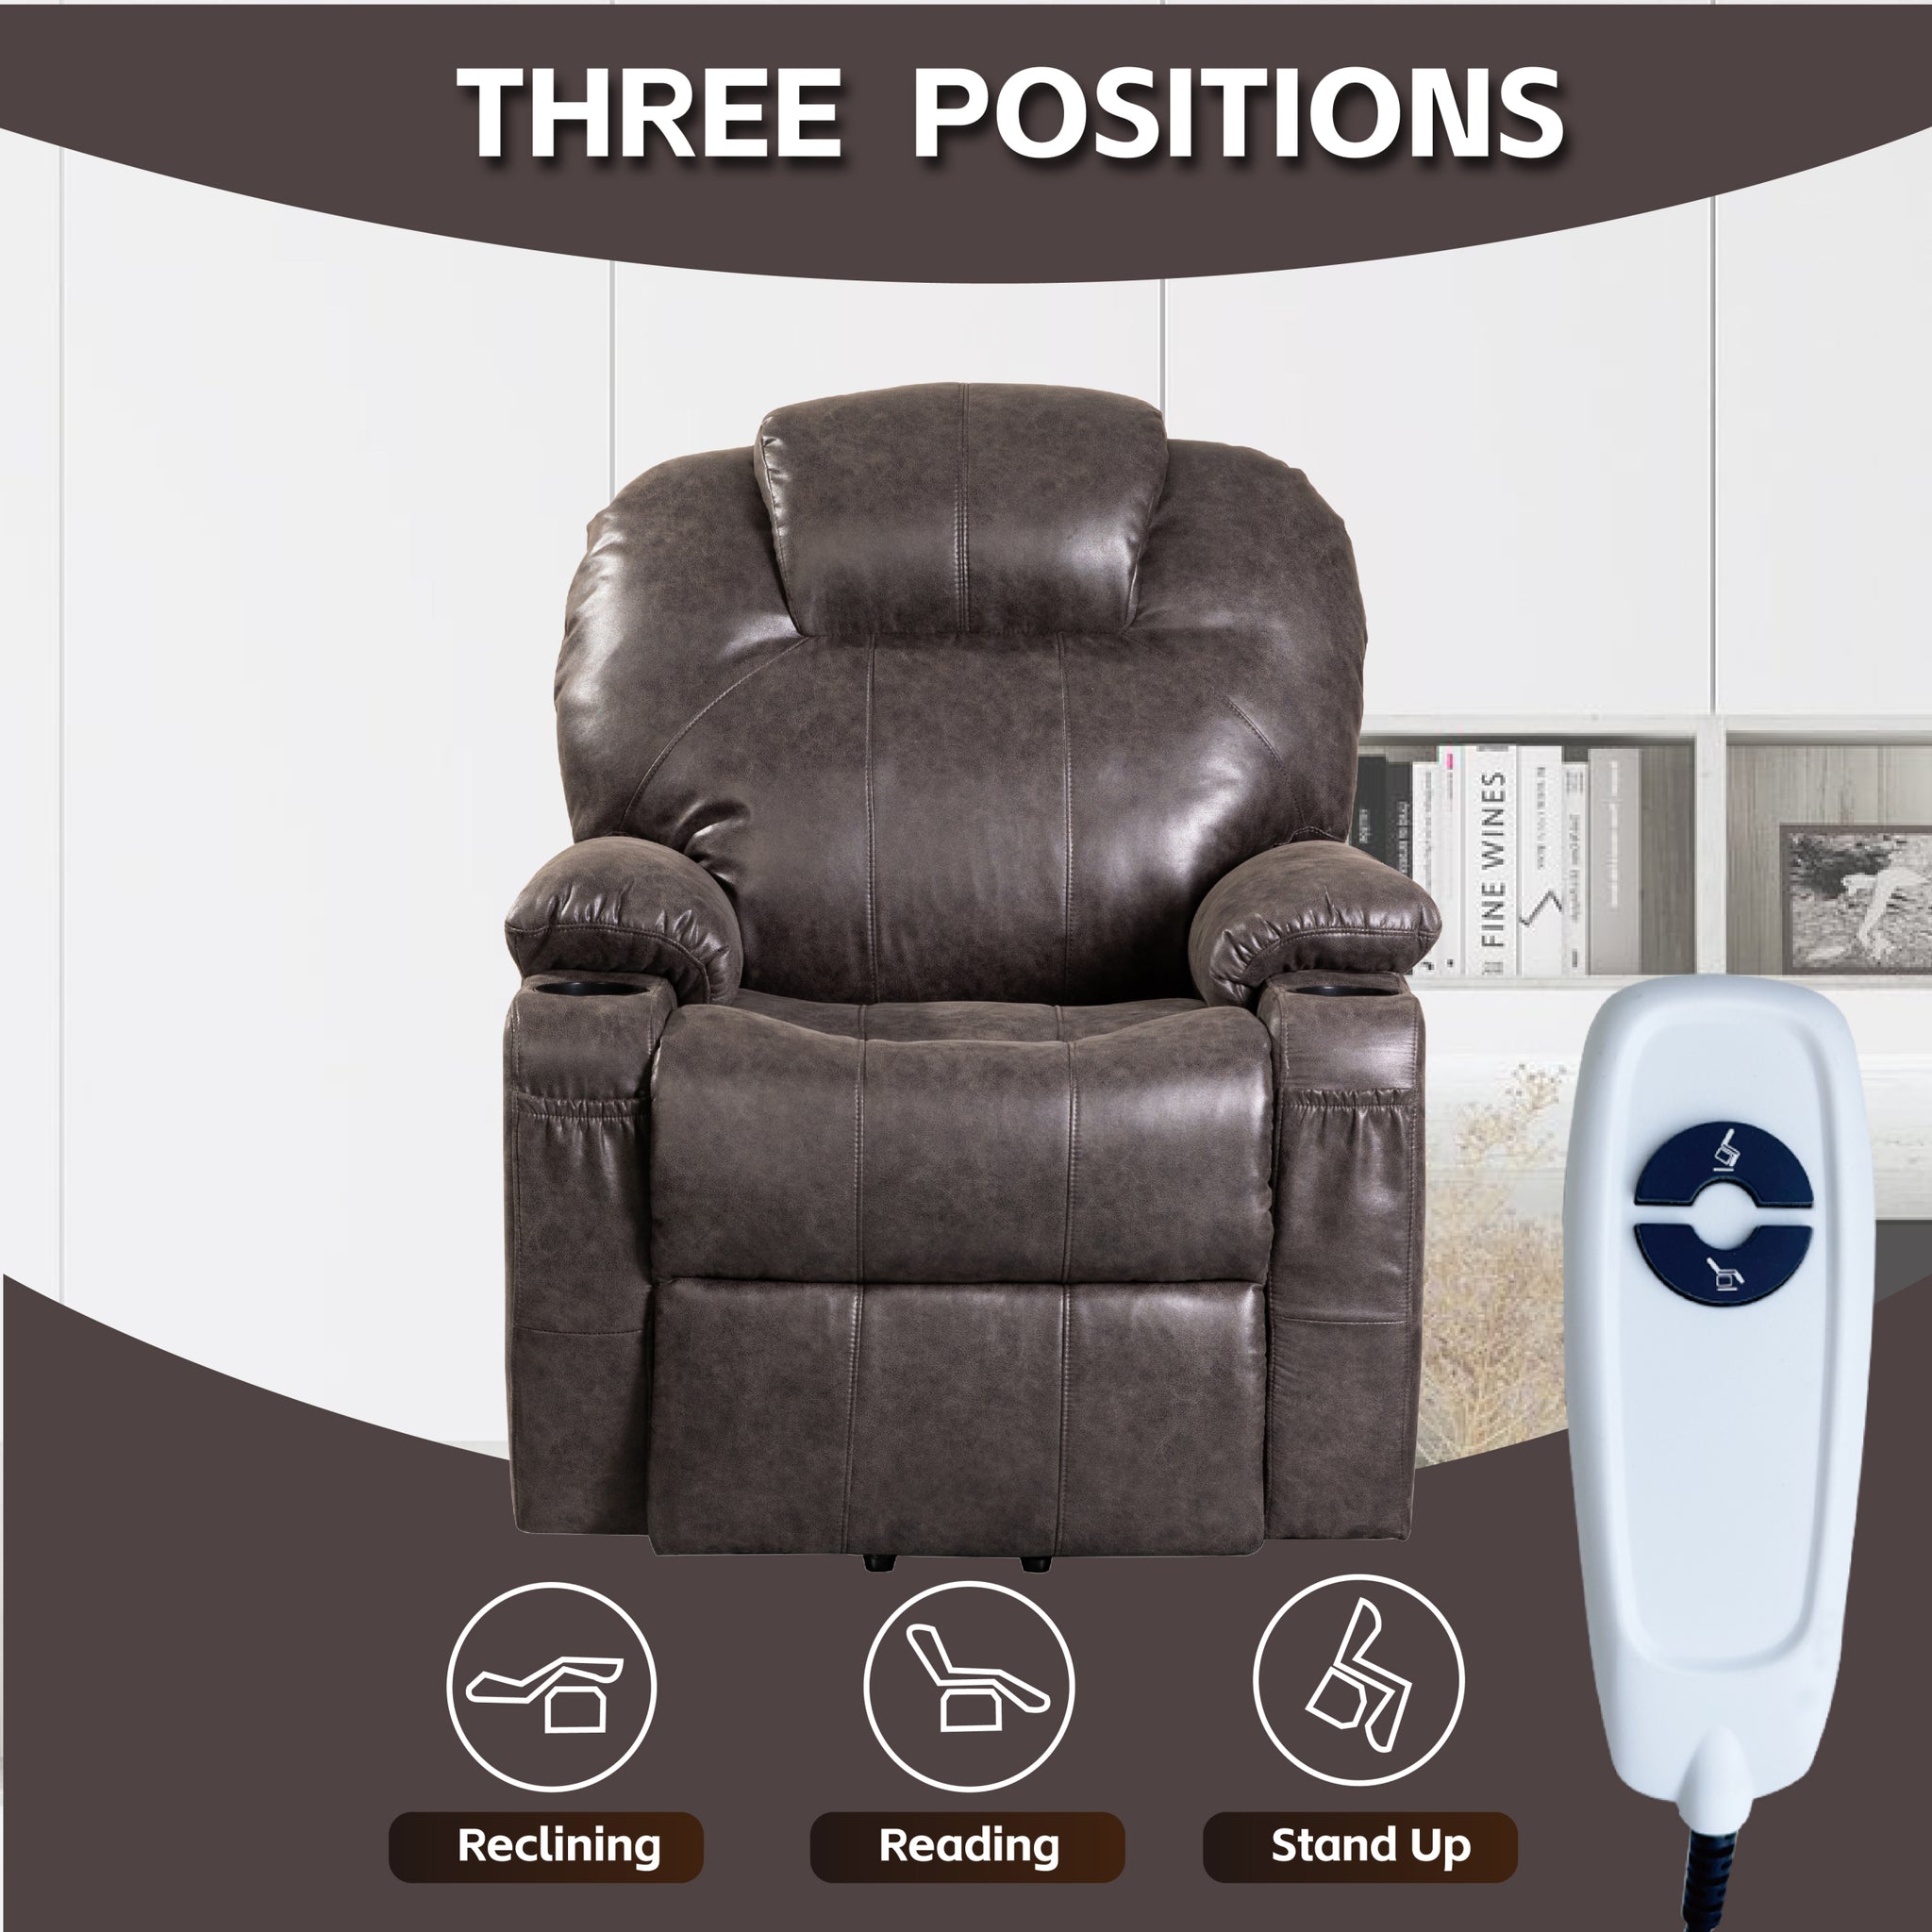 Lift Chair Recliners, Electric Power Recliner black-bonded leather